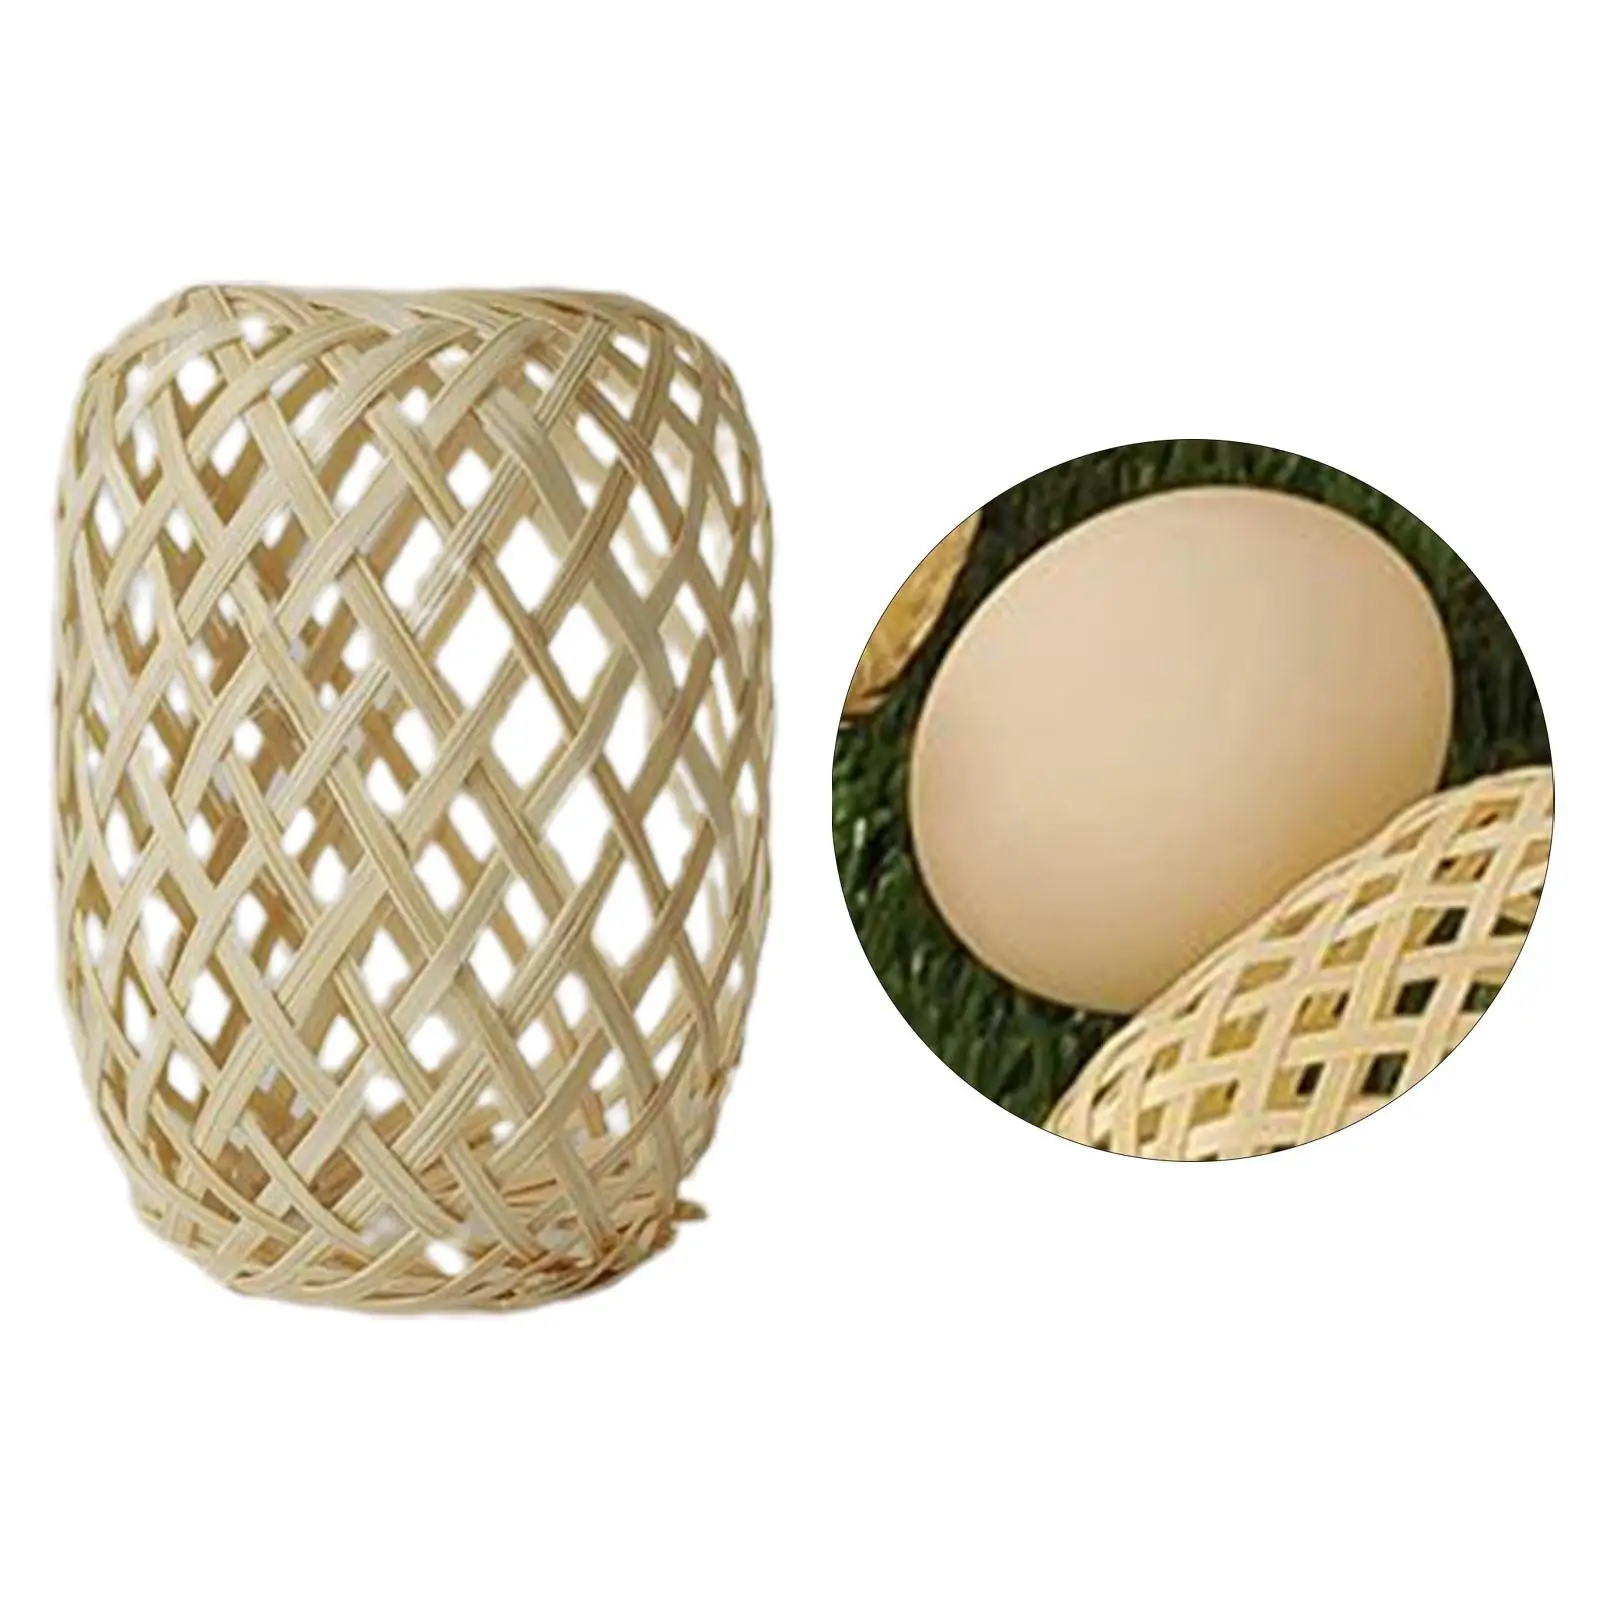 Retro Style Lantern Handwoven Bamboo Lamp Shade for Kitchen Bedroom